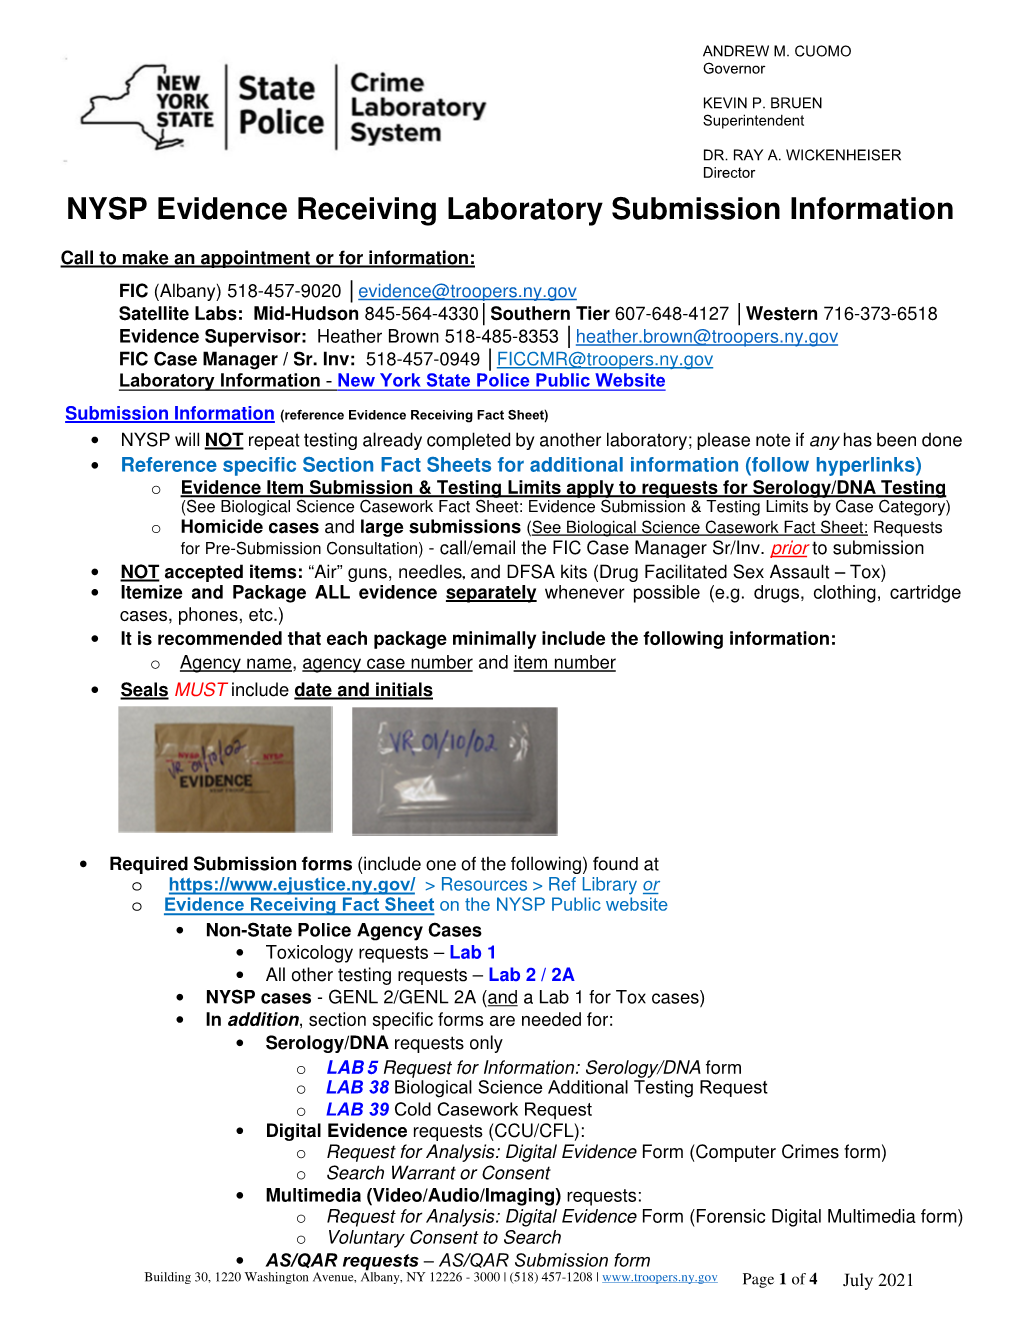 NYSP Evidence Receiving Laboratory Submission Information